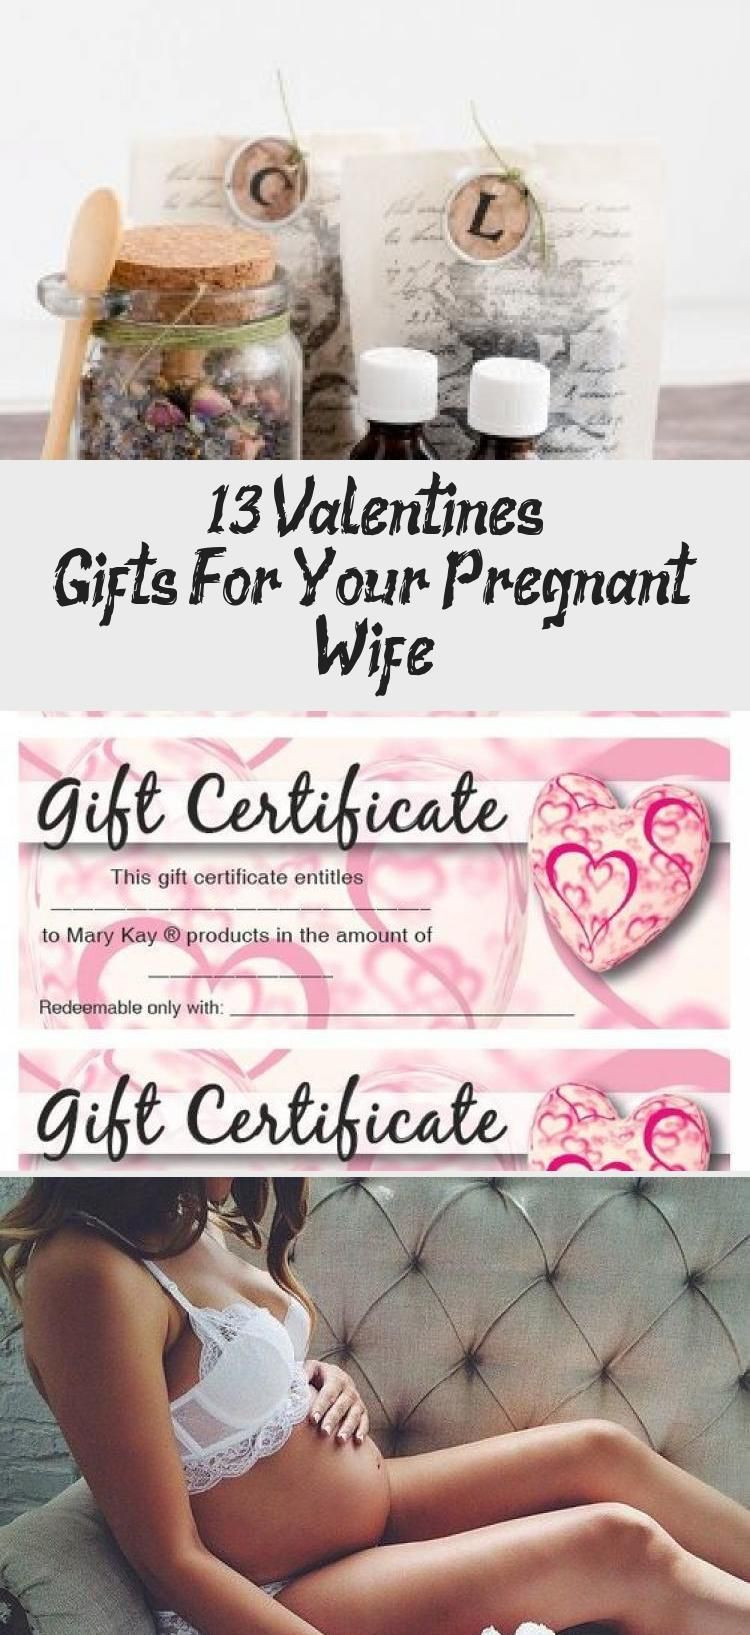 Valentines Gift Ideas for Pregnant Wife Luxury 13 Valentine’s Gifts for Your Pregnant Wife In 2020